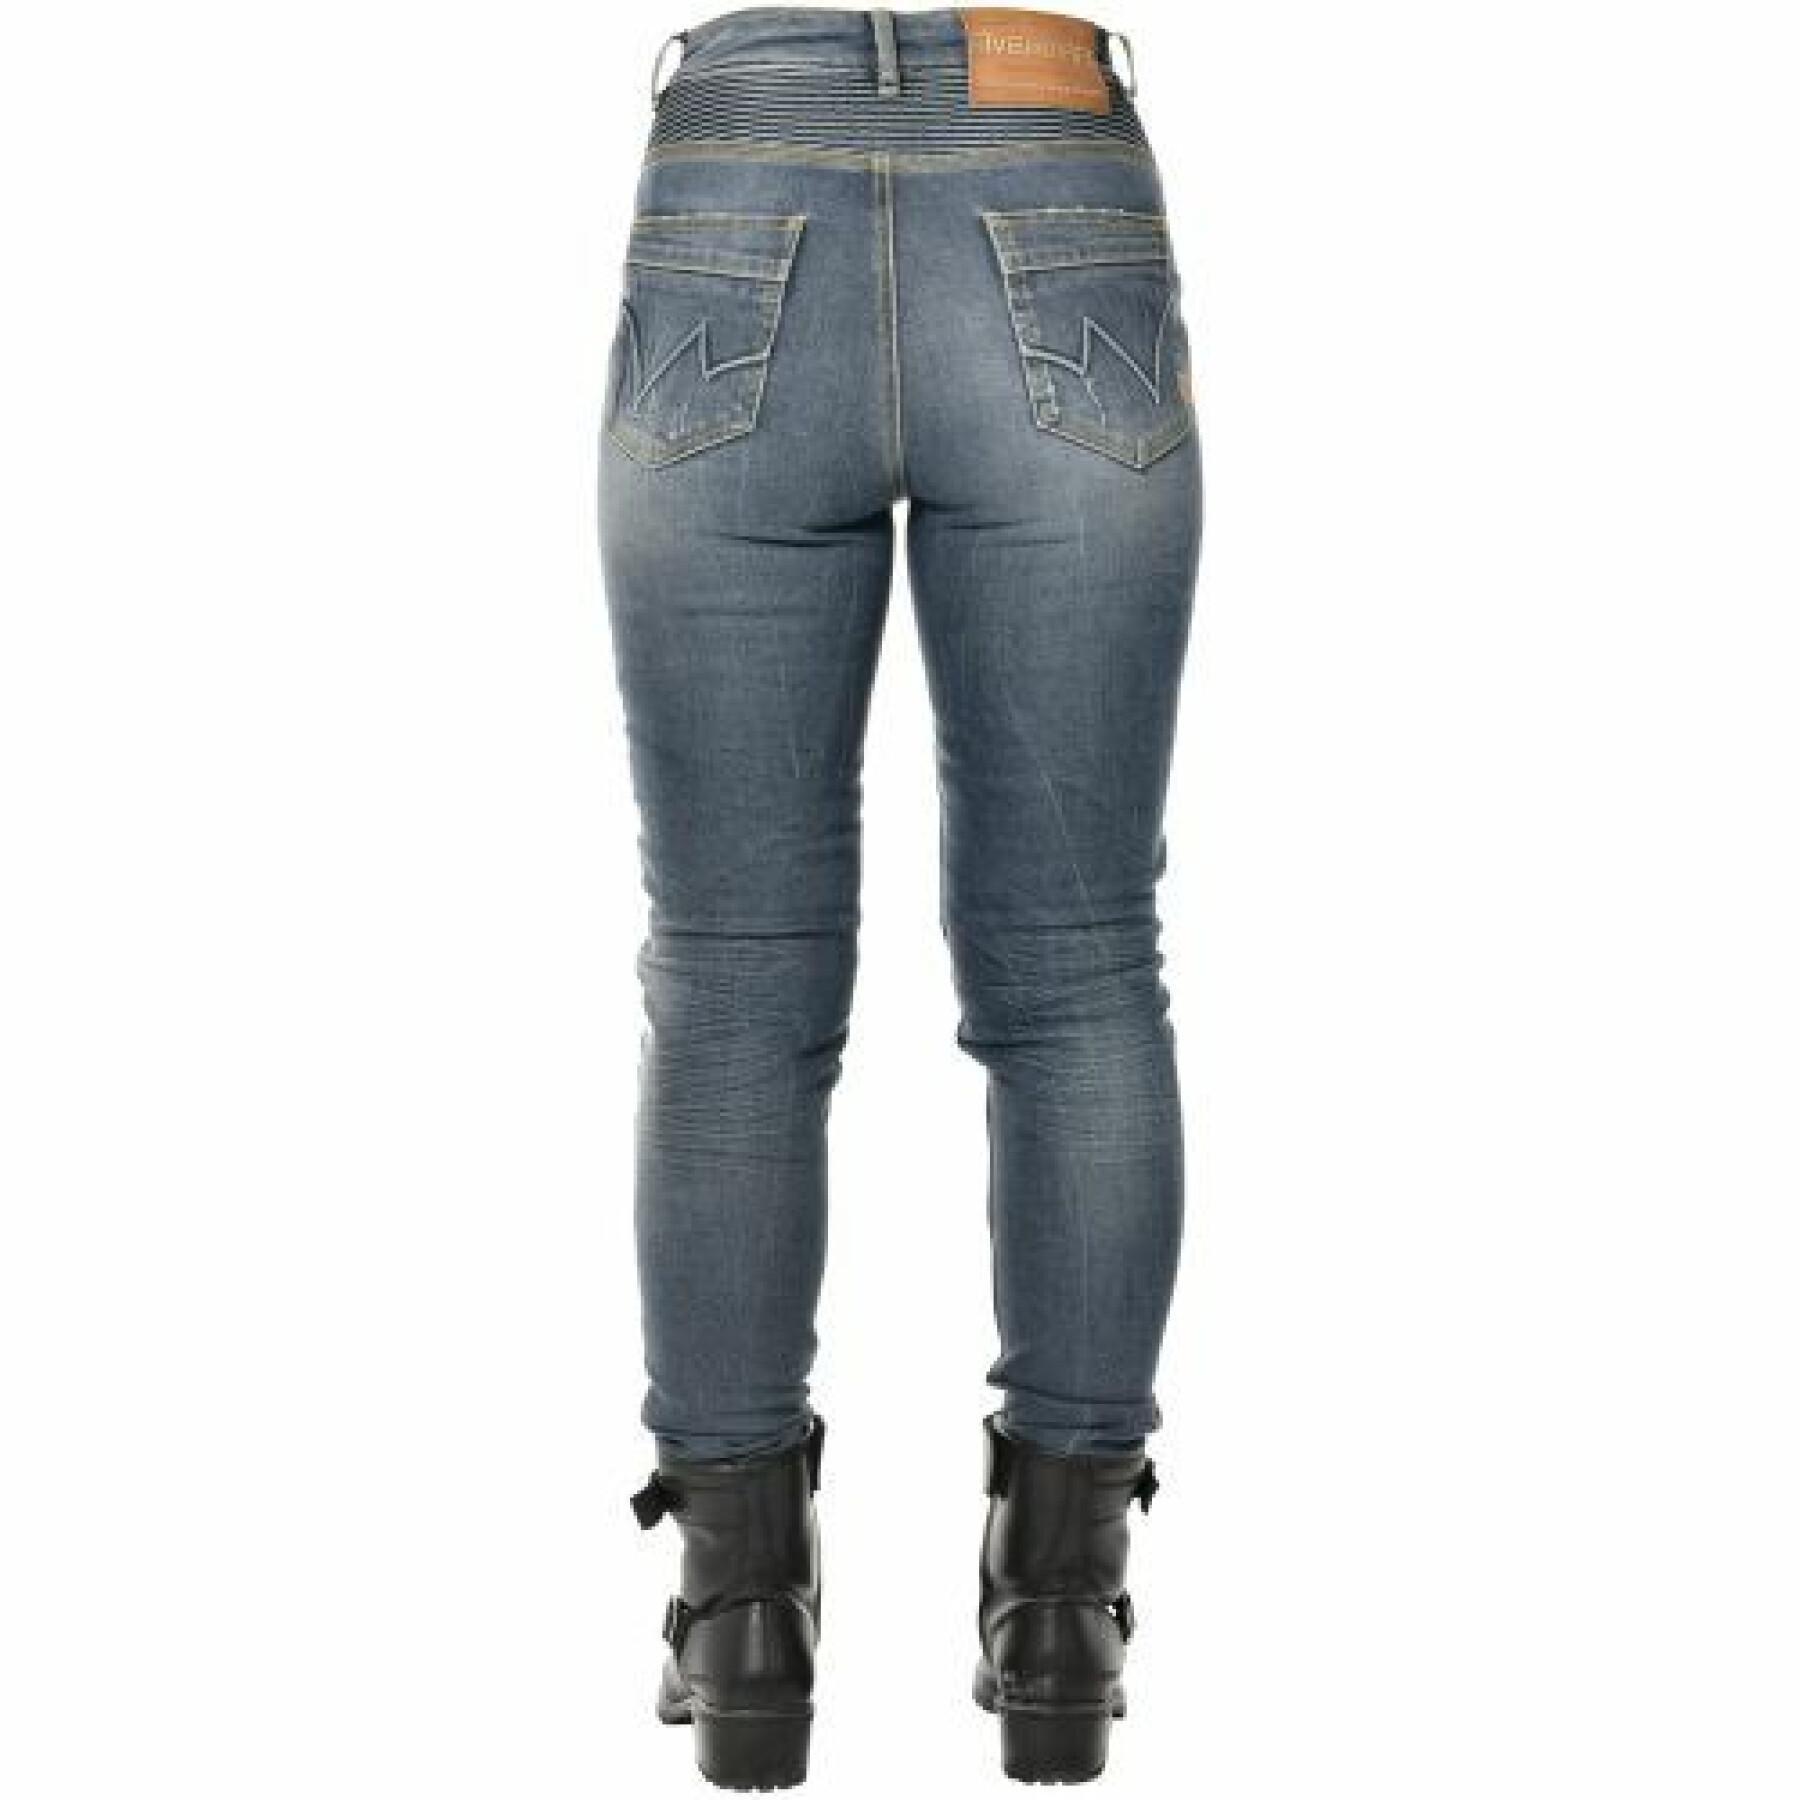 Motorcycle jeans woman Overlap Lexy